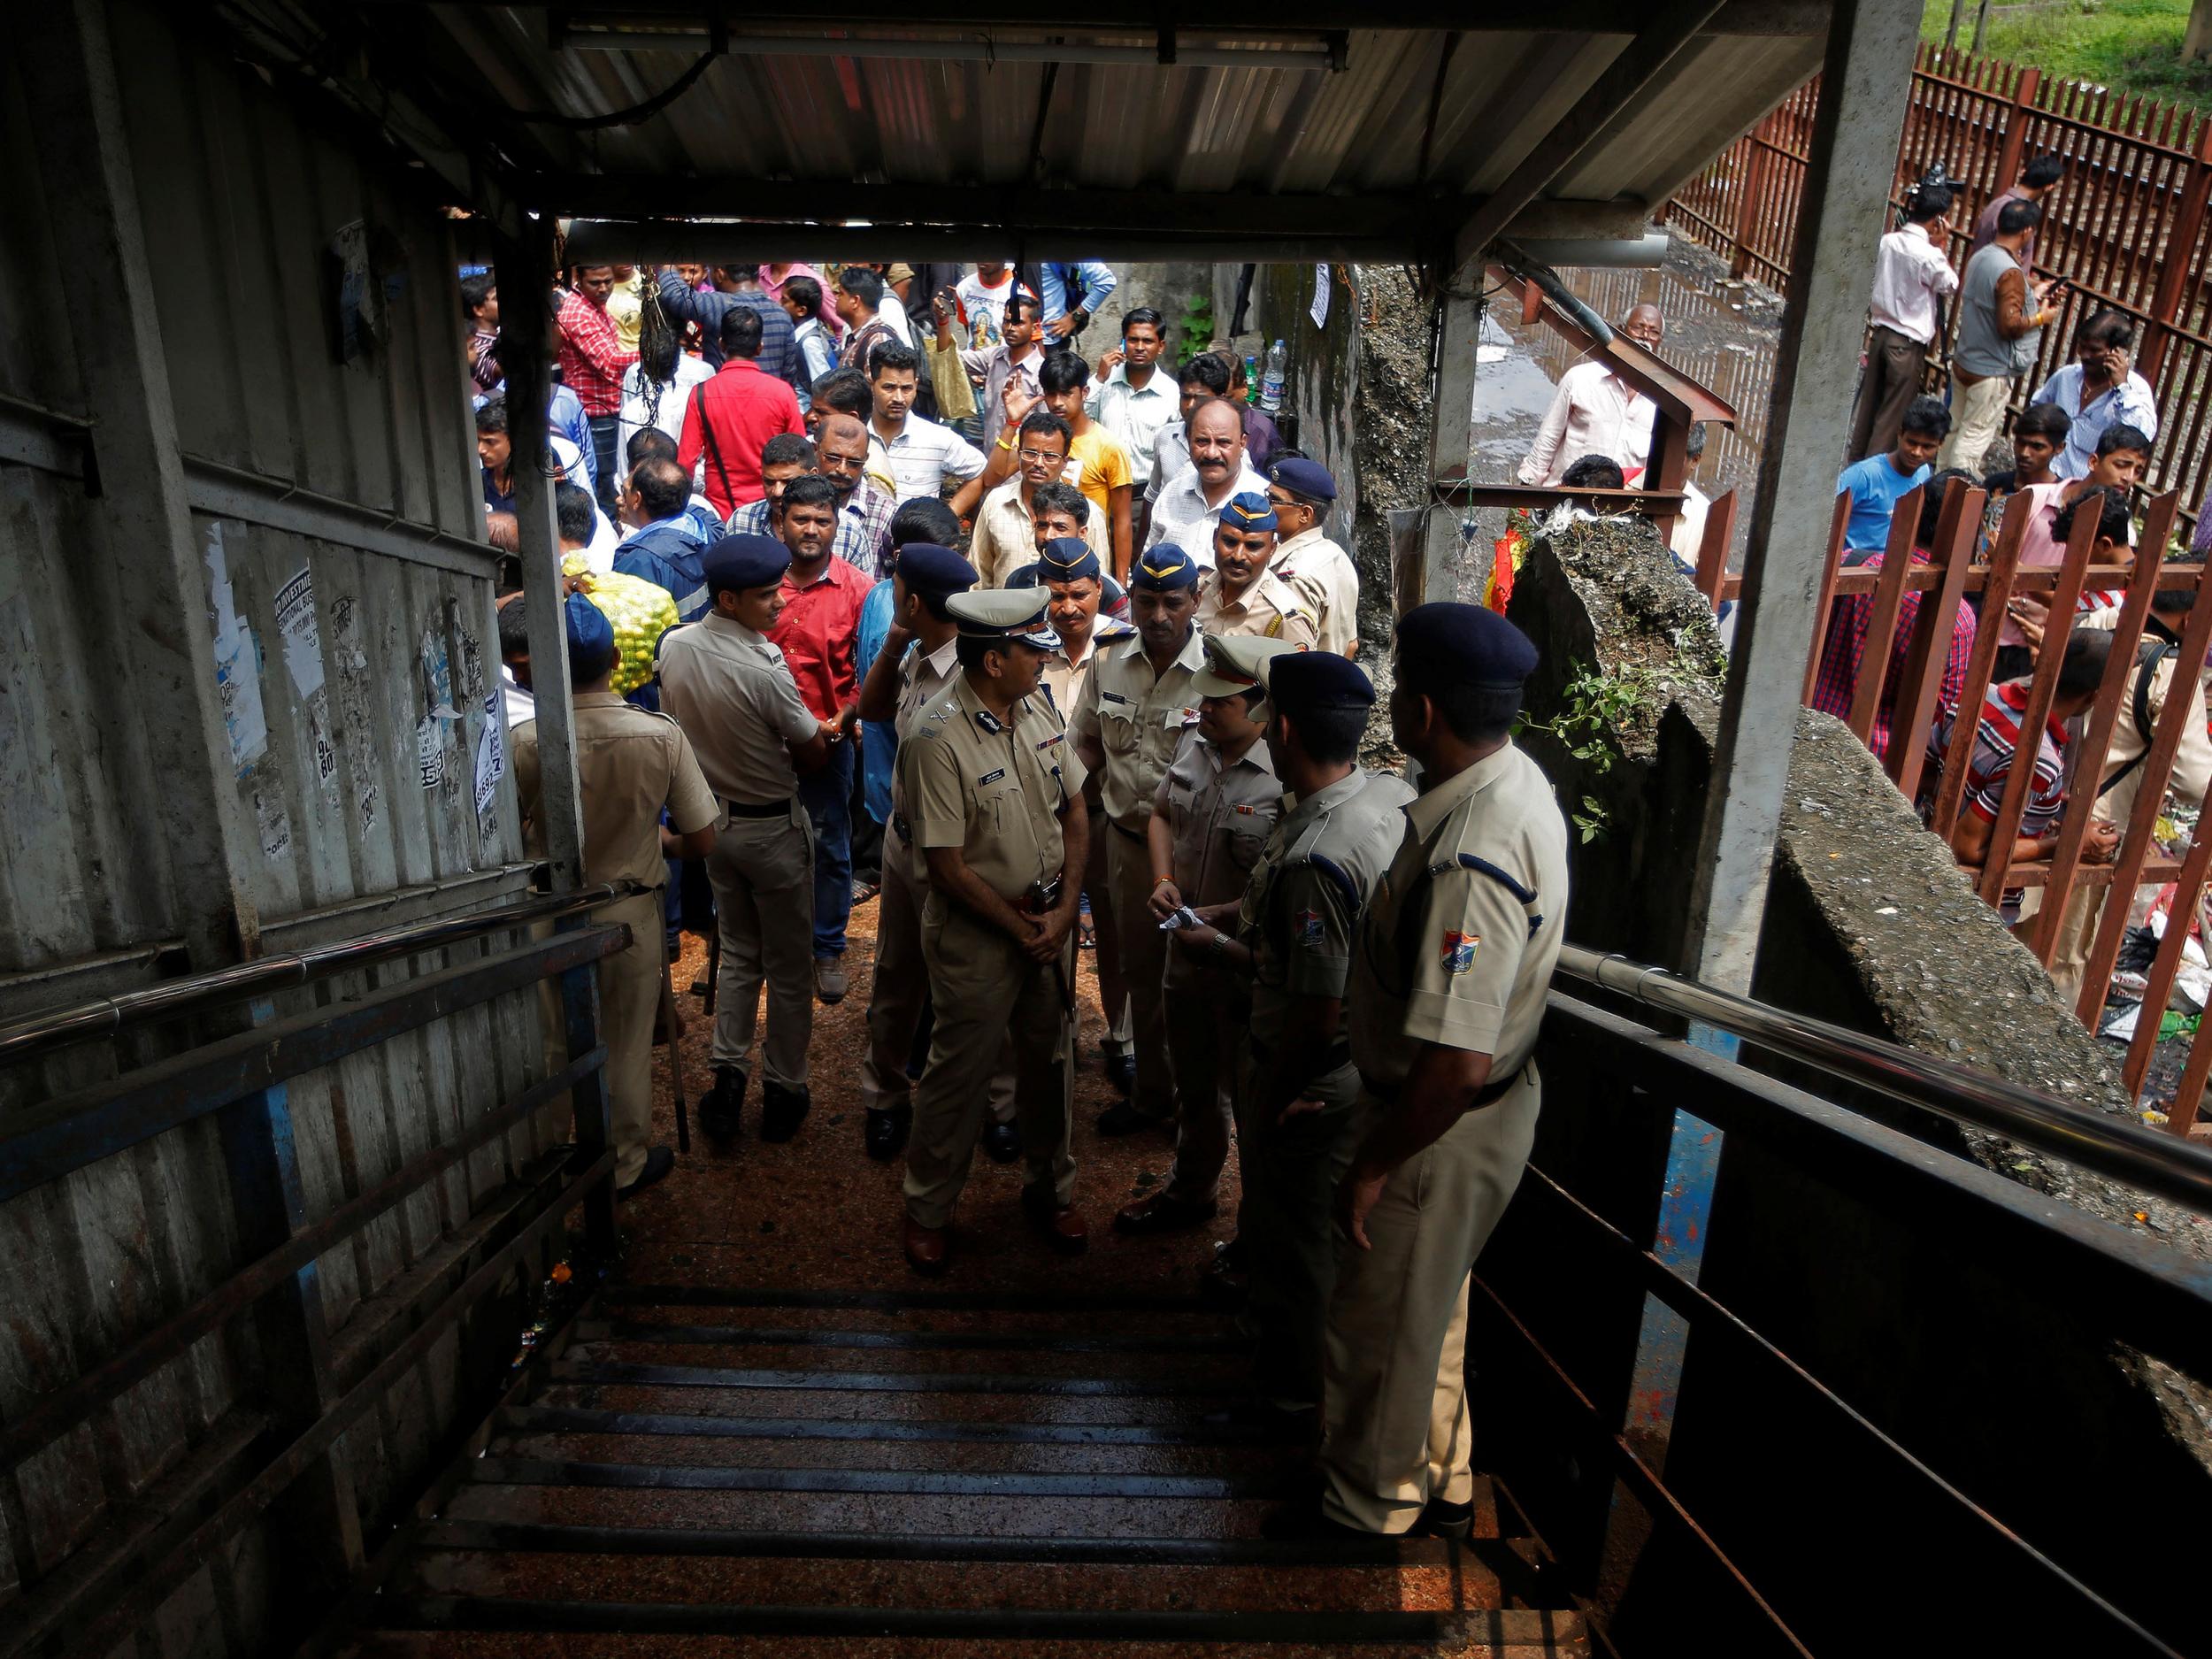 Policemen inspect the site of a stampede at a railway station's pedestrian overbridge in Mumbai, India September 29, 2017